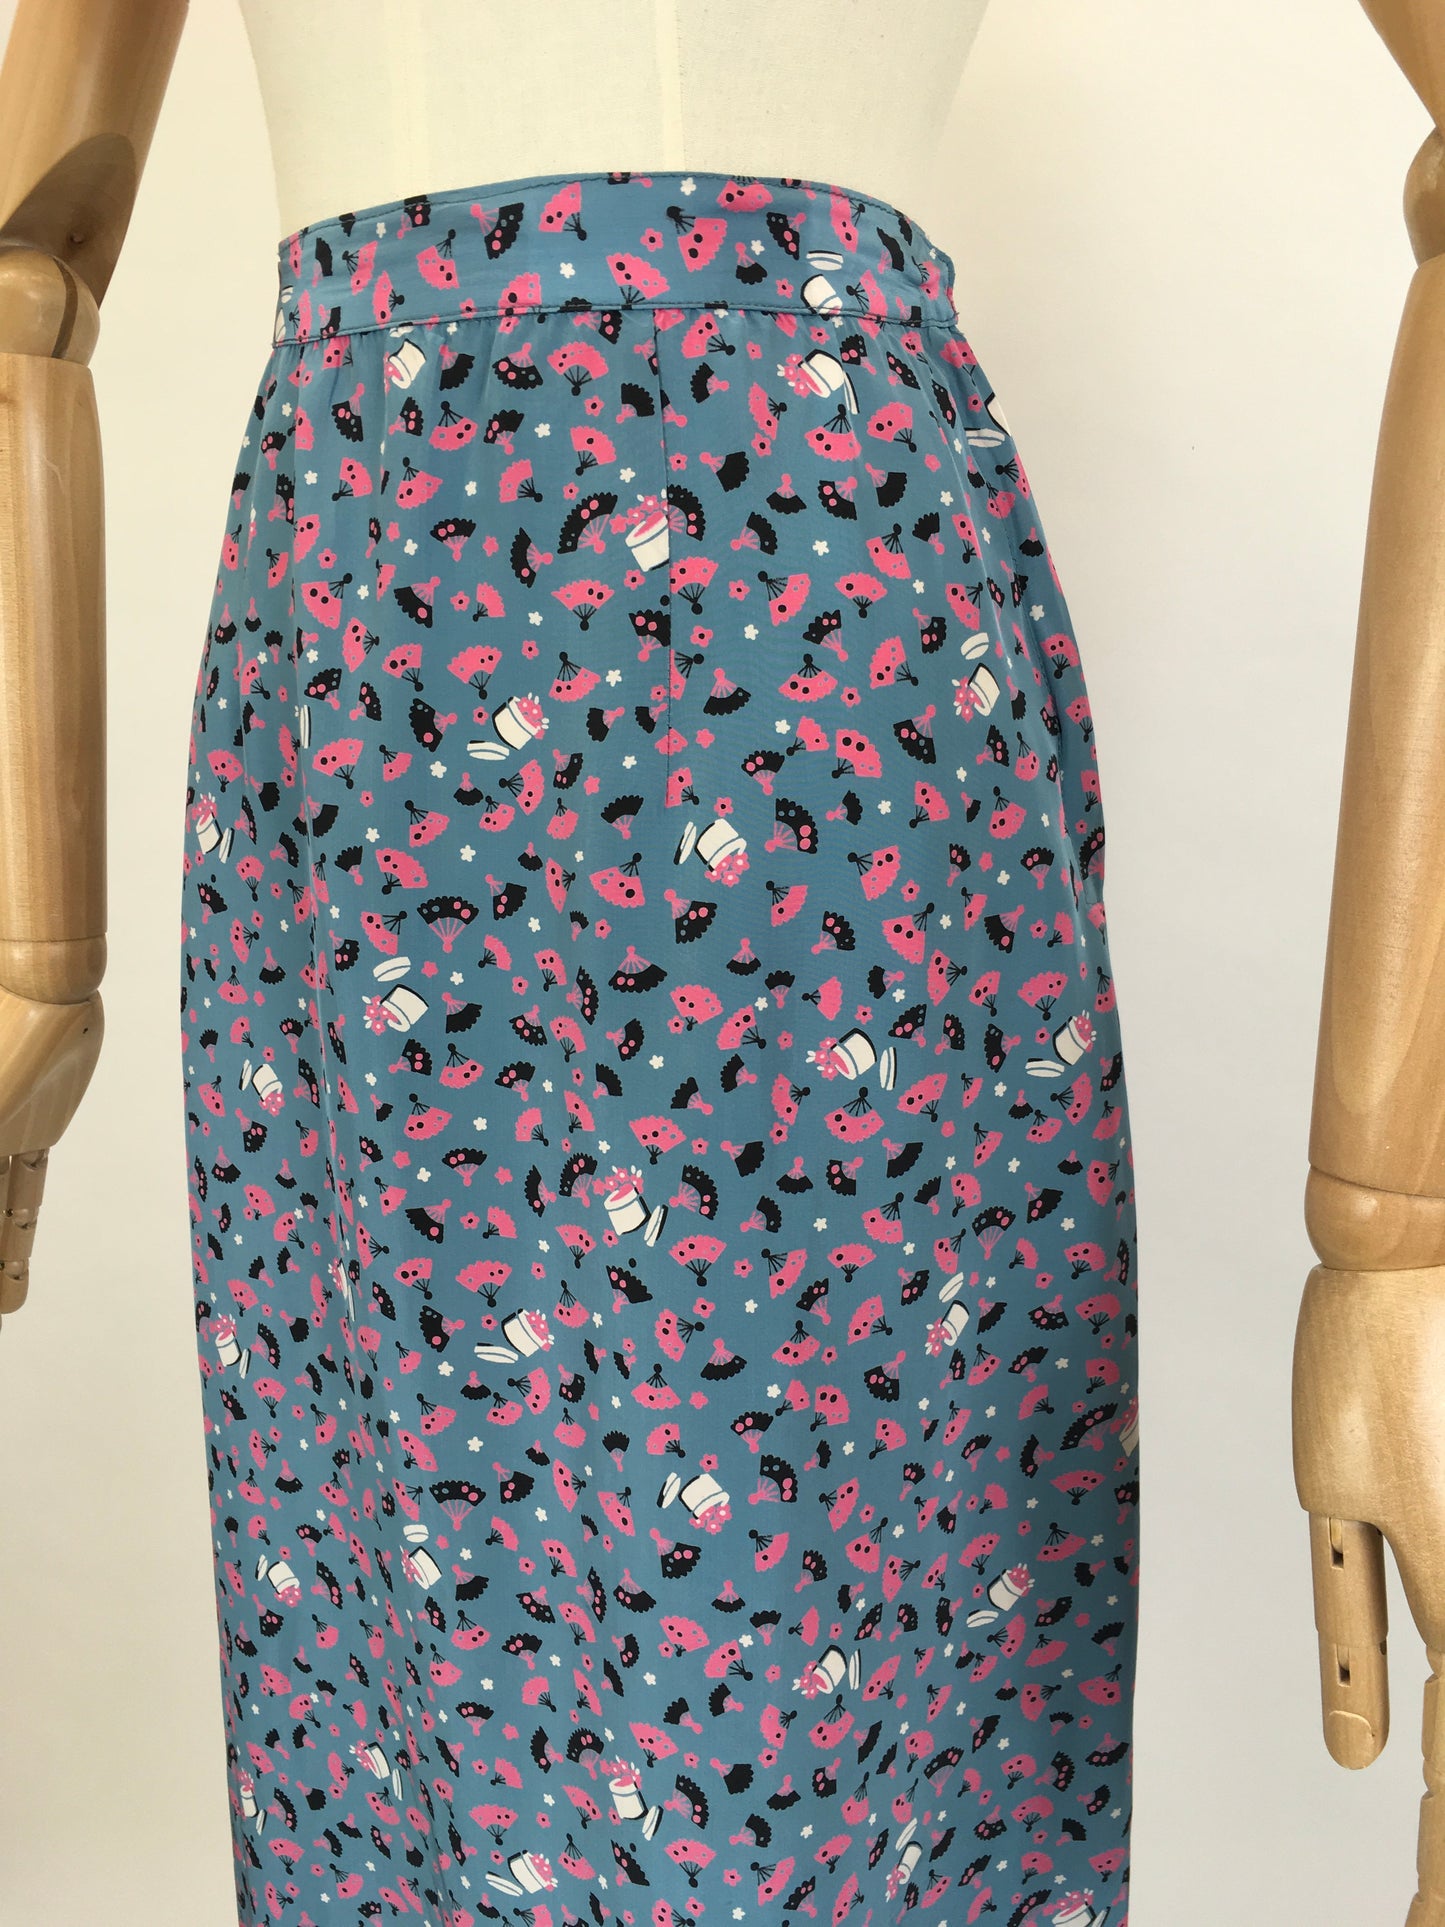 Original 1940’s FABULOUS Novelty Print Rayon Skirt - Featuring A Vanity Scene of Fans, Trinket Pots and Vases